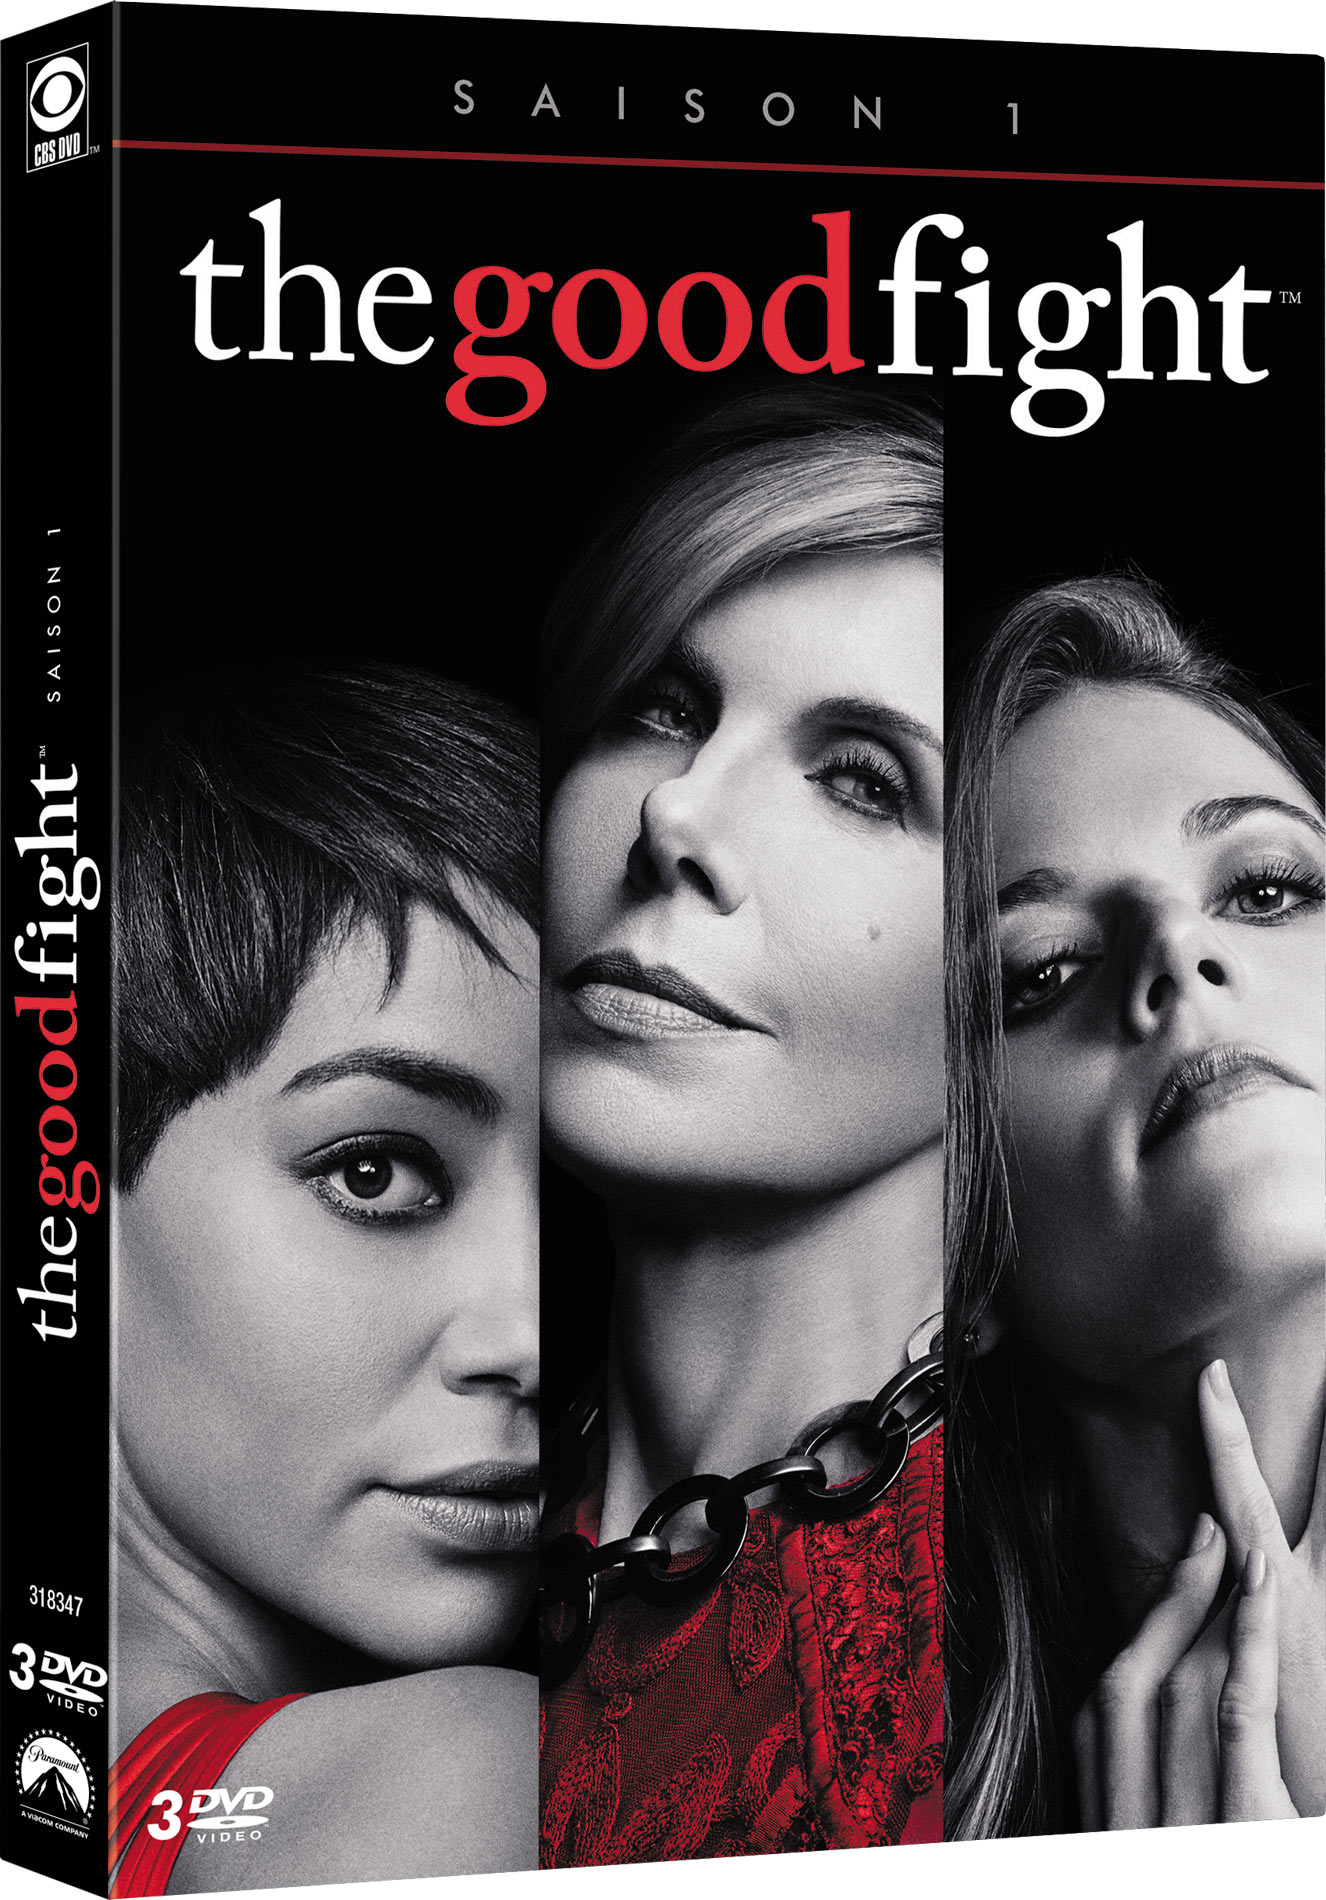 THE GOOD FIGHT S01